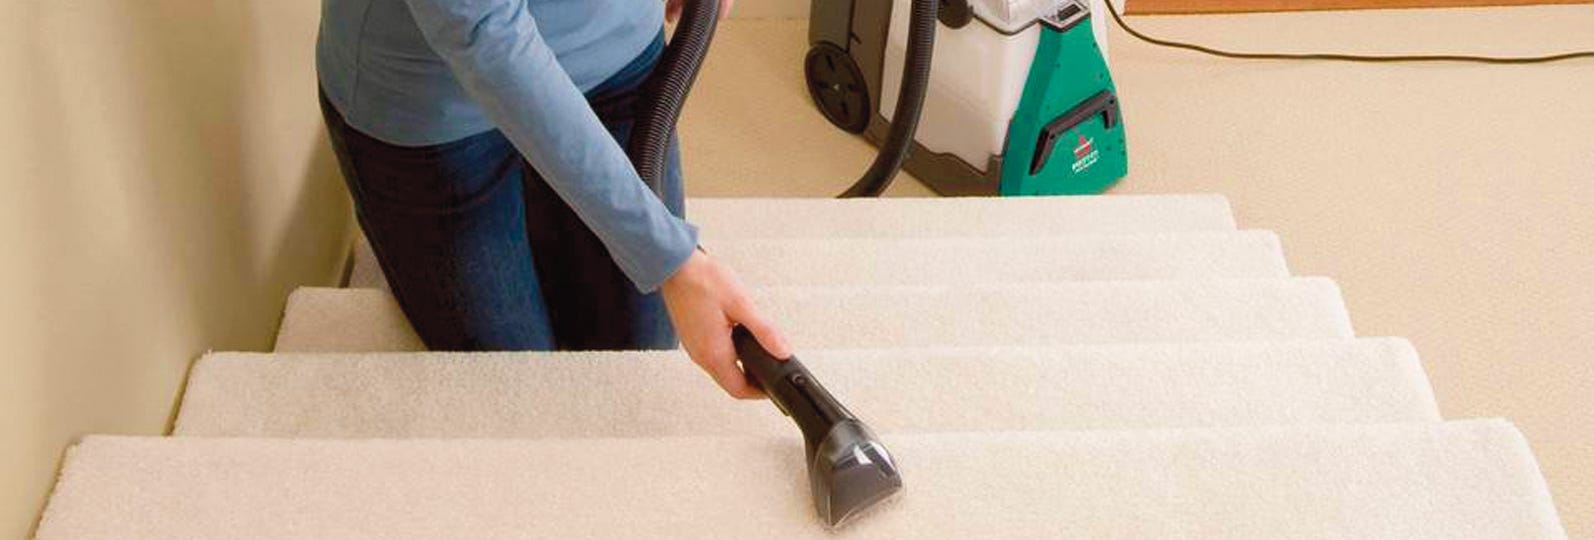 Used Carpet Cleaners